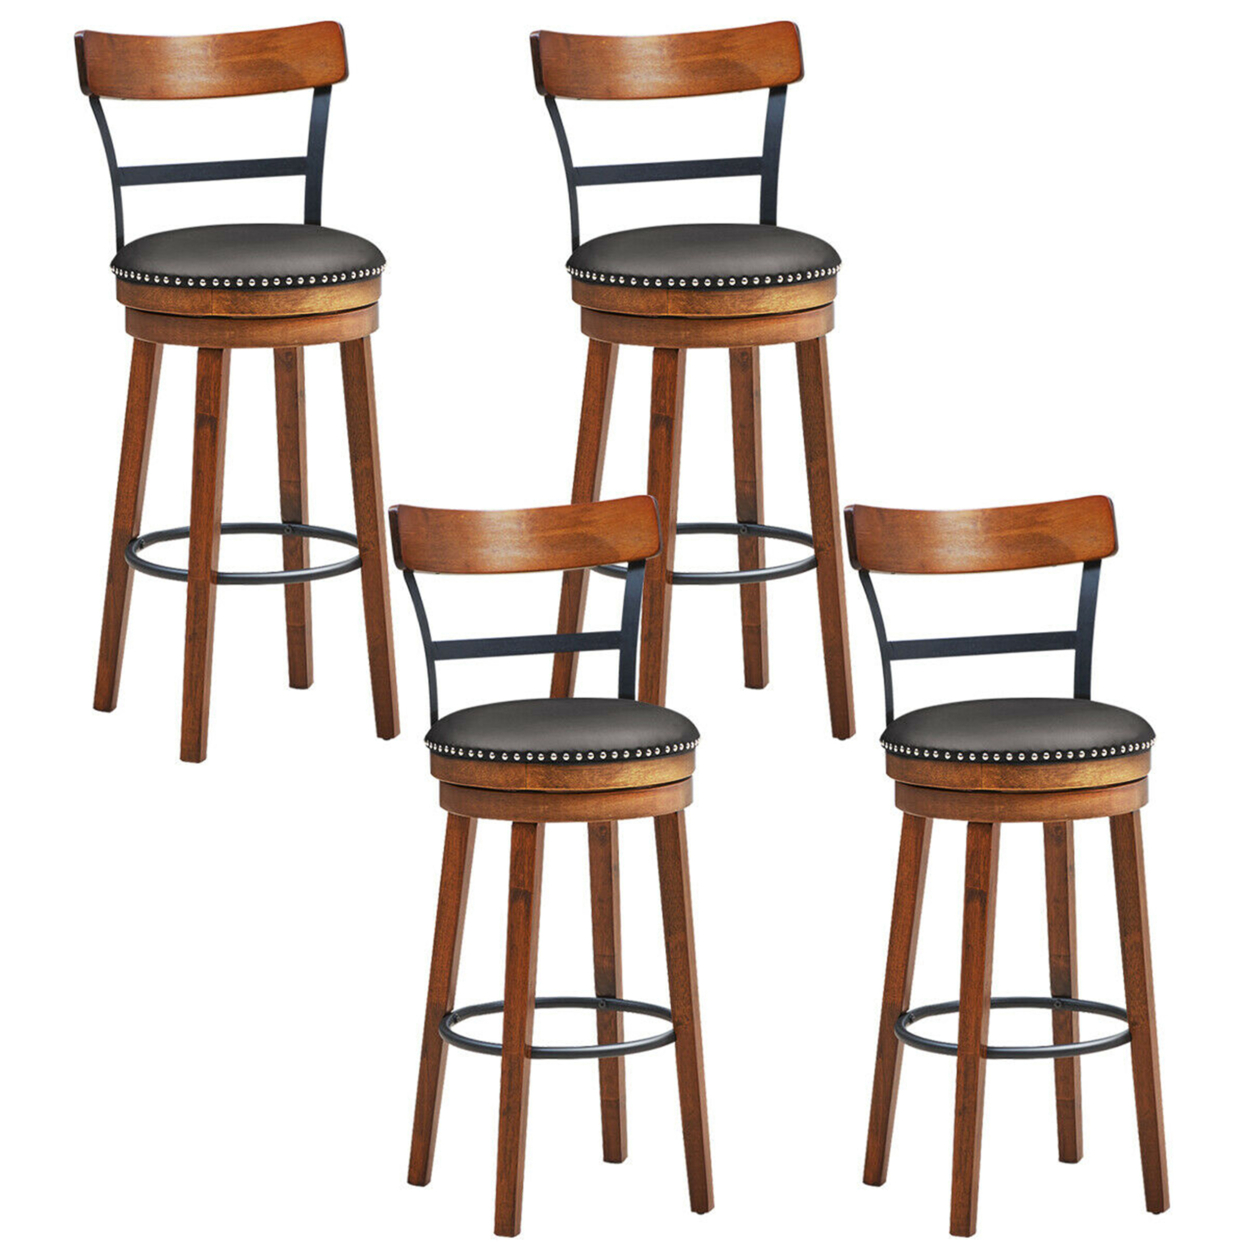 Set Of 4 BarStool 30.5'' Swivel Pub Height Dining Chair With Rubber Wood Legs